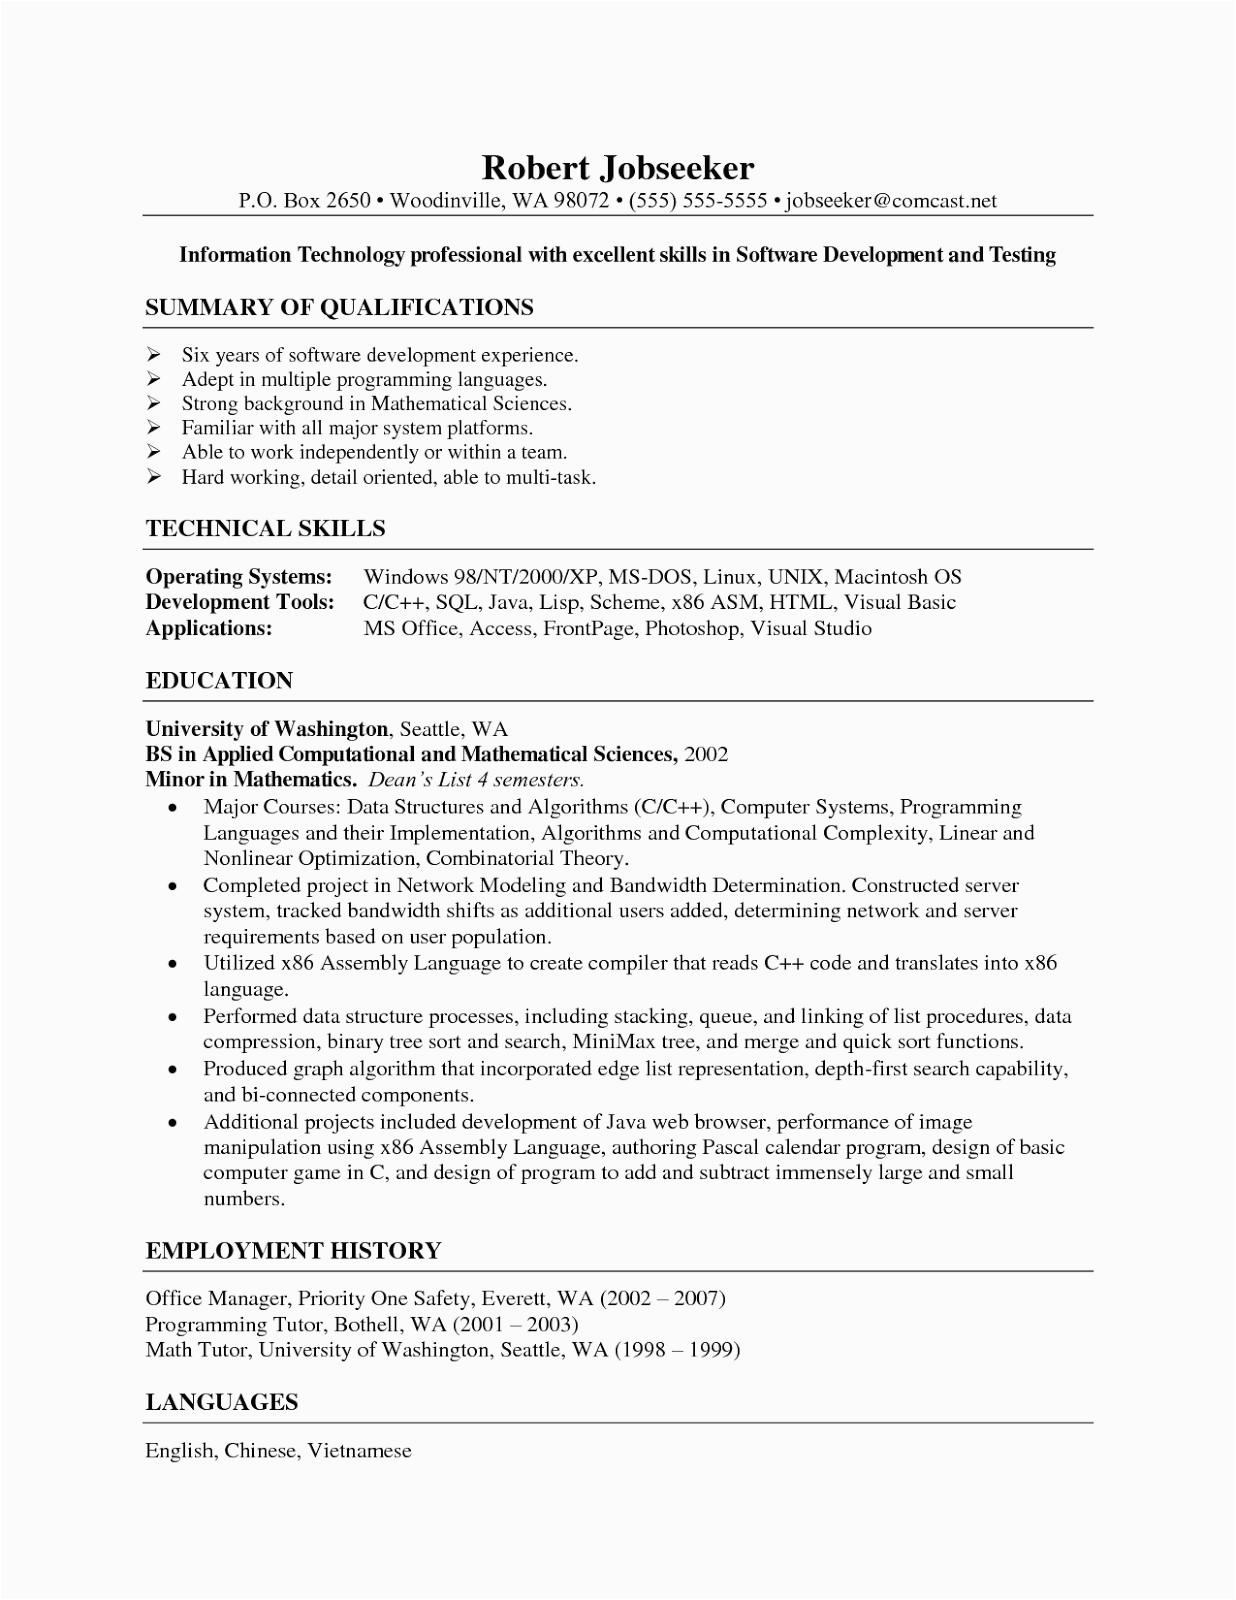 Sample Resume for Medical Billing and Coding with No Experience Medical Billing and Coding Cover Letter with No Experience